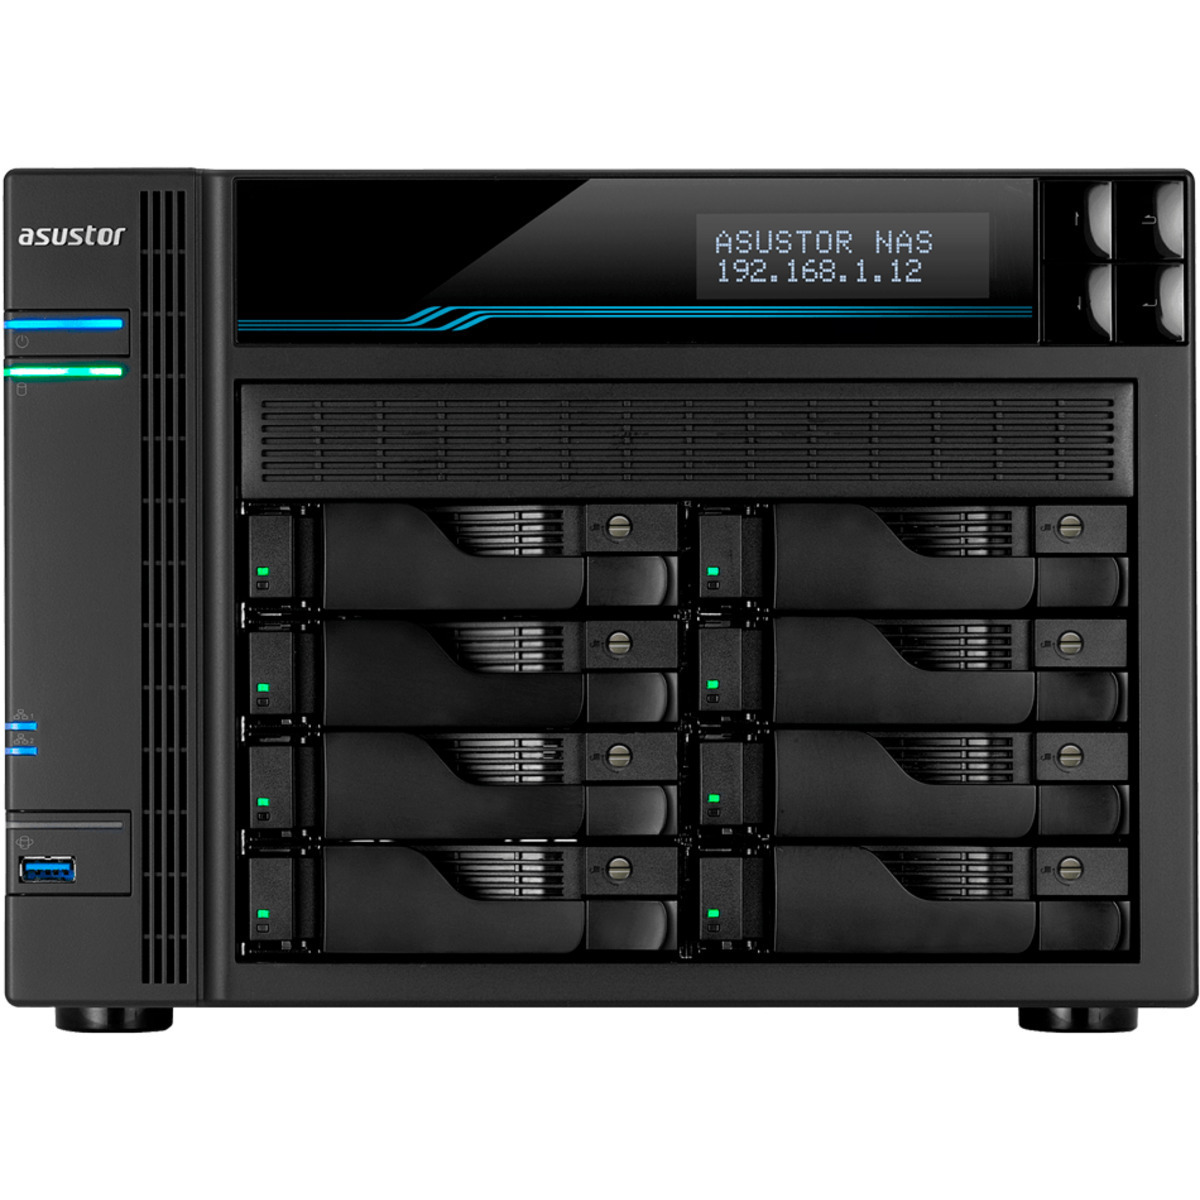 ASUSTOR AS6508T Lockerstor 8 84tb 8-Bay Desktop Multimedia / Power User / Business NAS - Network Attached Storage Device 7x12tb Seagate IronWolf Pro ST12000NT001 3.5 7200rpm SATA 6Gb/s HDD NAS Class Drives Installed - Burn-In Tested - ON SALE - FREE RAM UPGRADE AS6508T Lockerstor 8